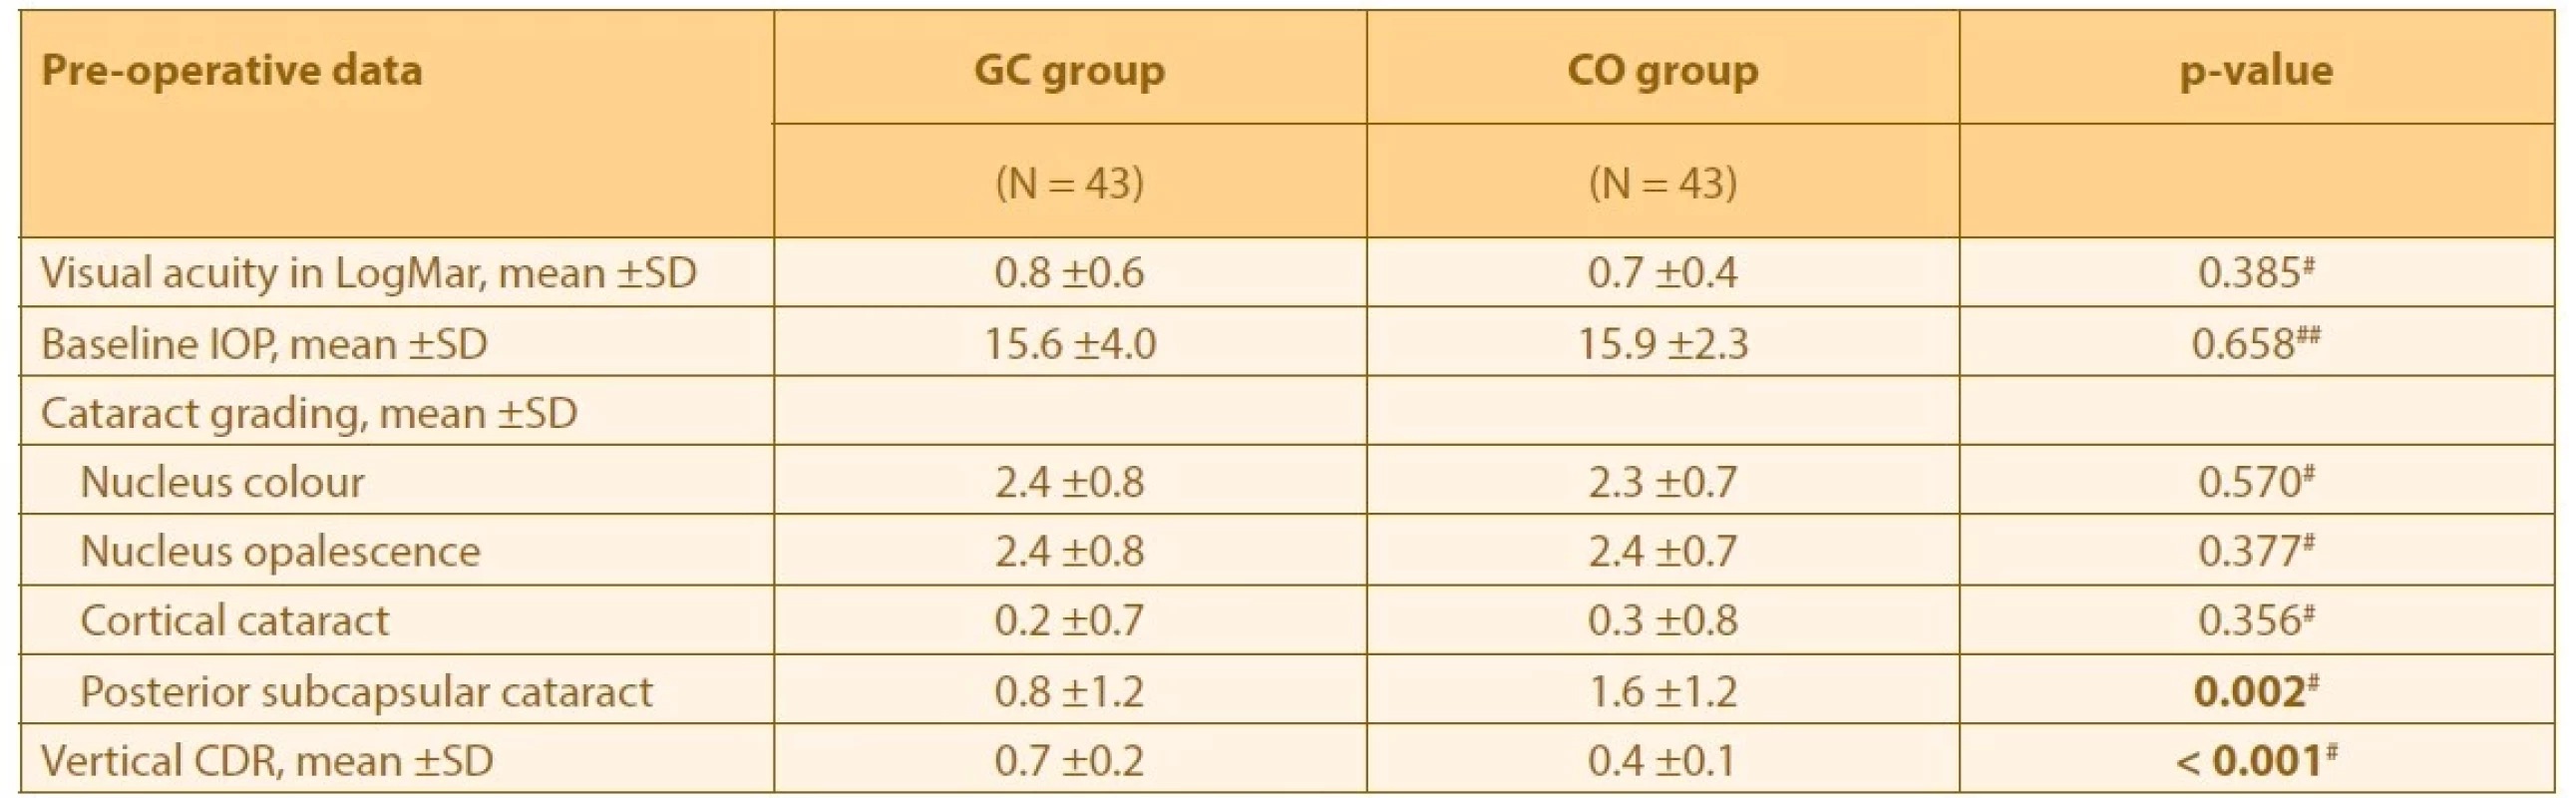 Comparison of pre-operative data between GC and CO groups